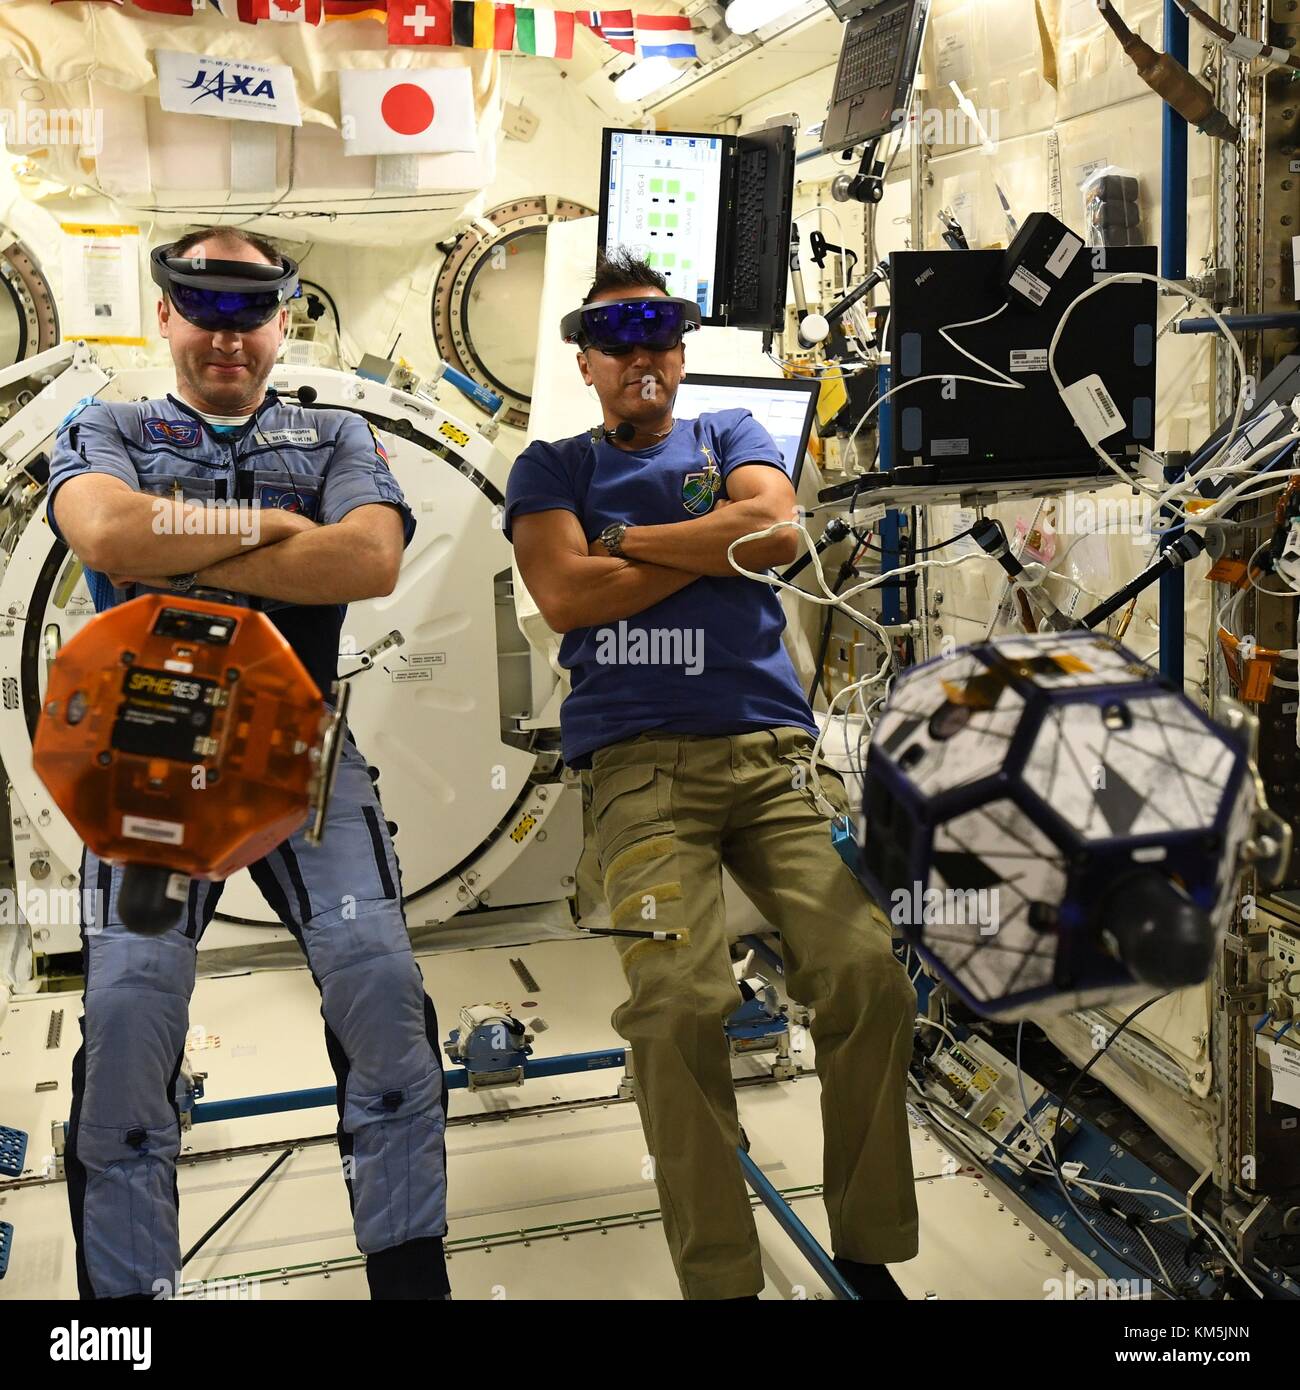 International Space Station, Earth Orbit. 04th Dec, 2017. Expedition 53 Russian cosmonaut Sasha Misurkin, left, and American astronaut Joe Acaba, right, look through VR goggles during a test of the Zero Robotics student project aboard the International Space Station December 4, 2017 in Earth Orbit. Zero Robotics is a robotics programming competition for High School and Middle School students using SPHERES satellites inside the International Space Station. Credit: Planetpix/Alamy Live News Stock Photo